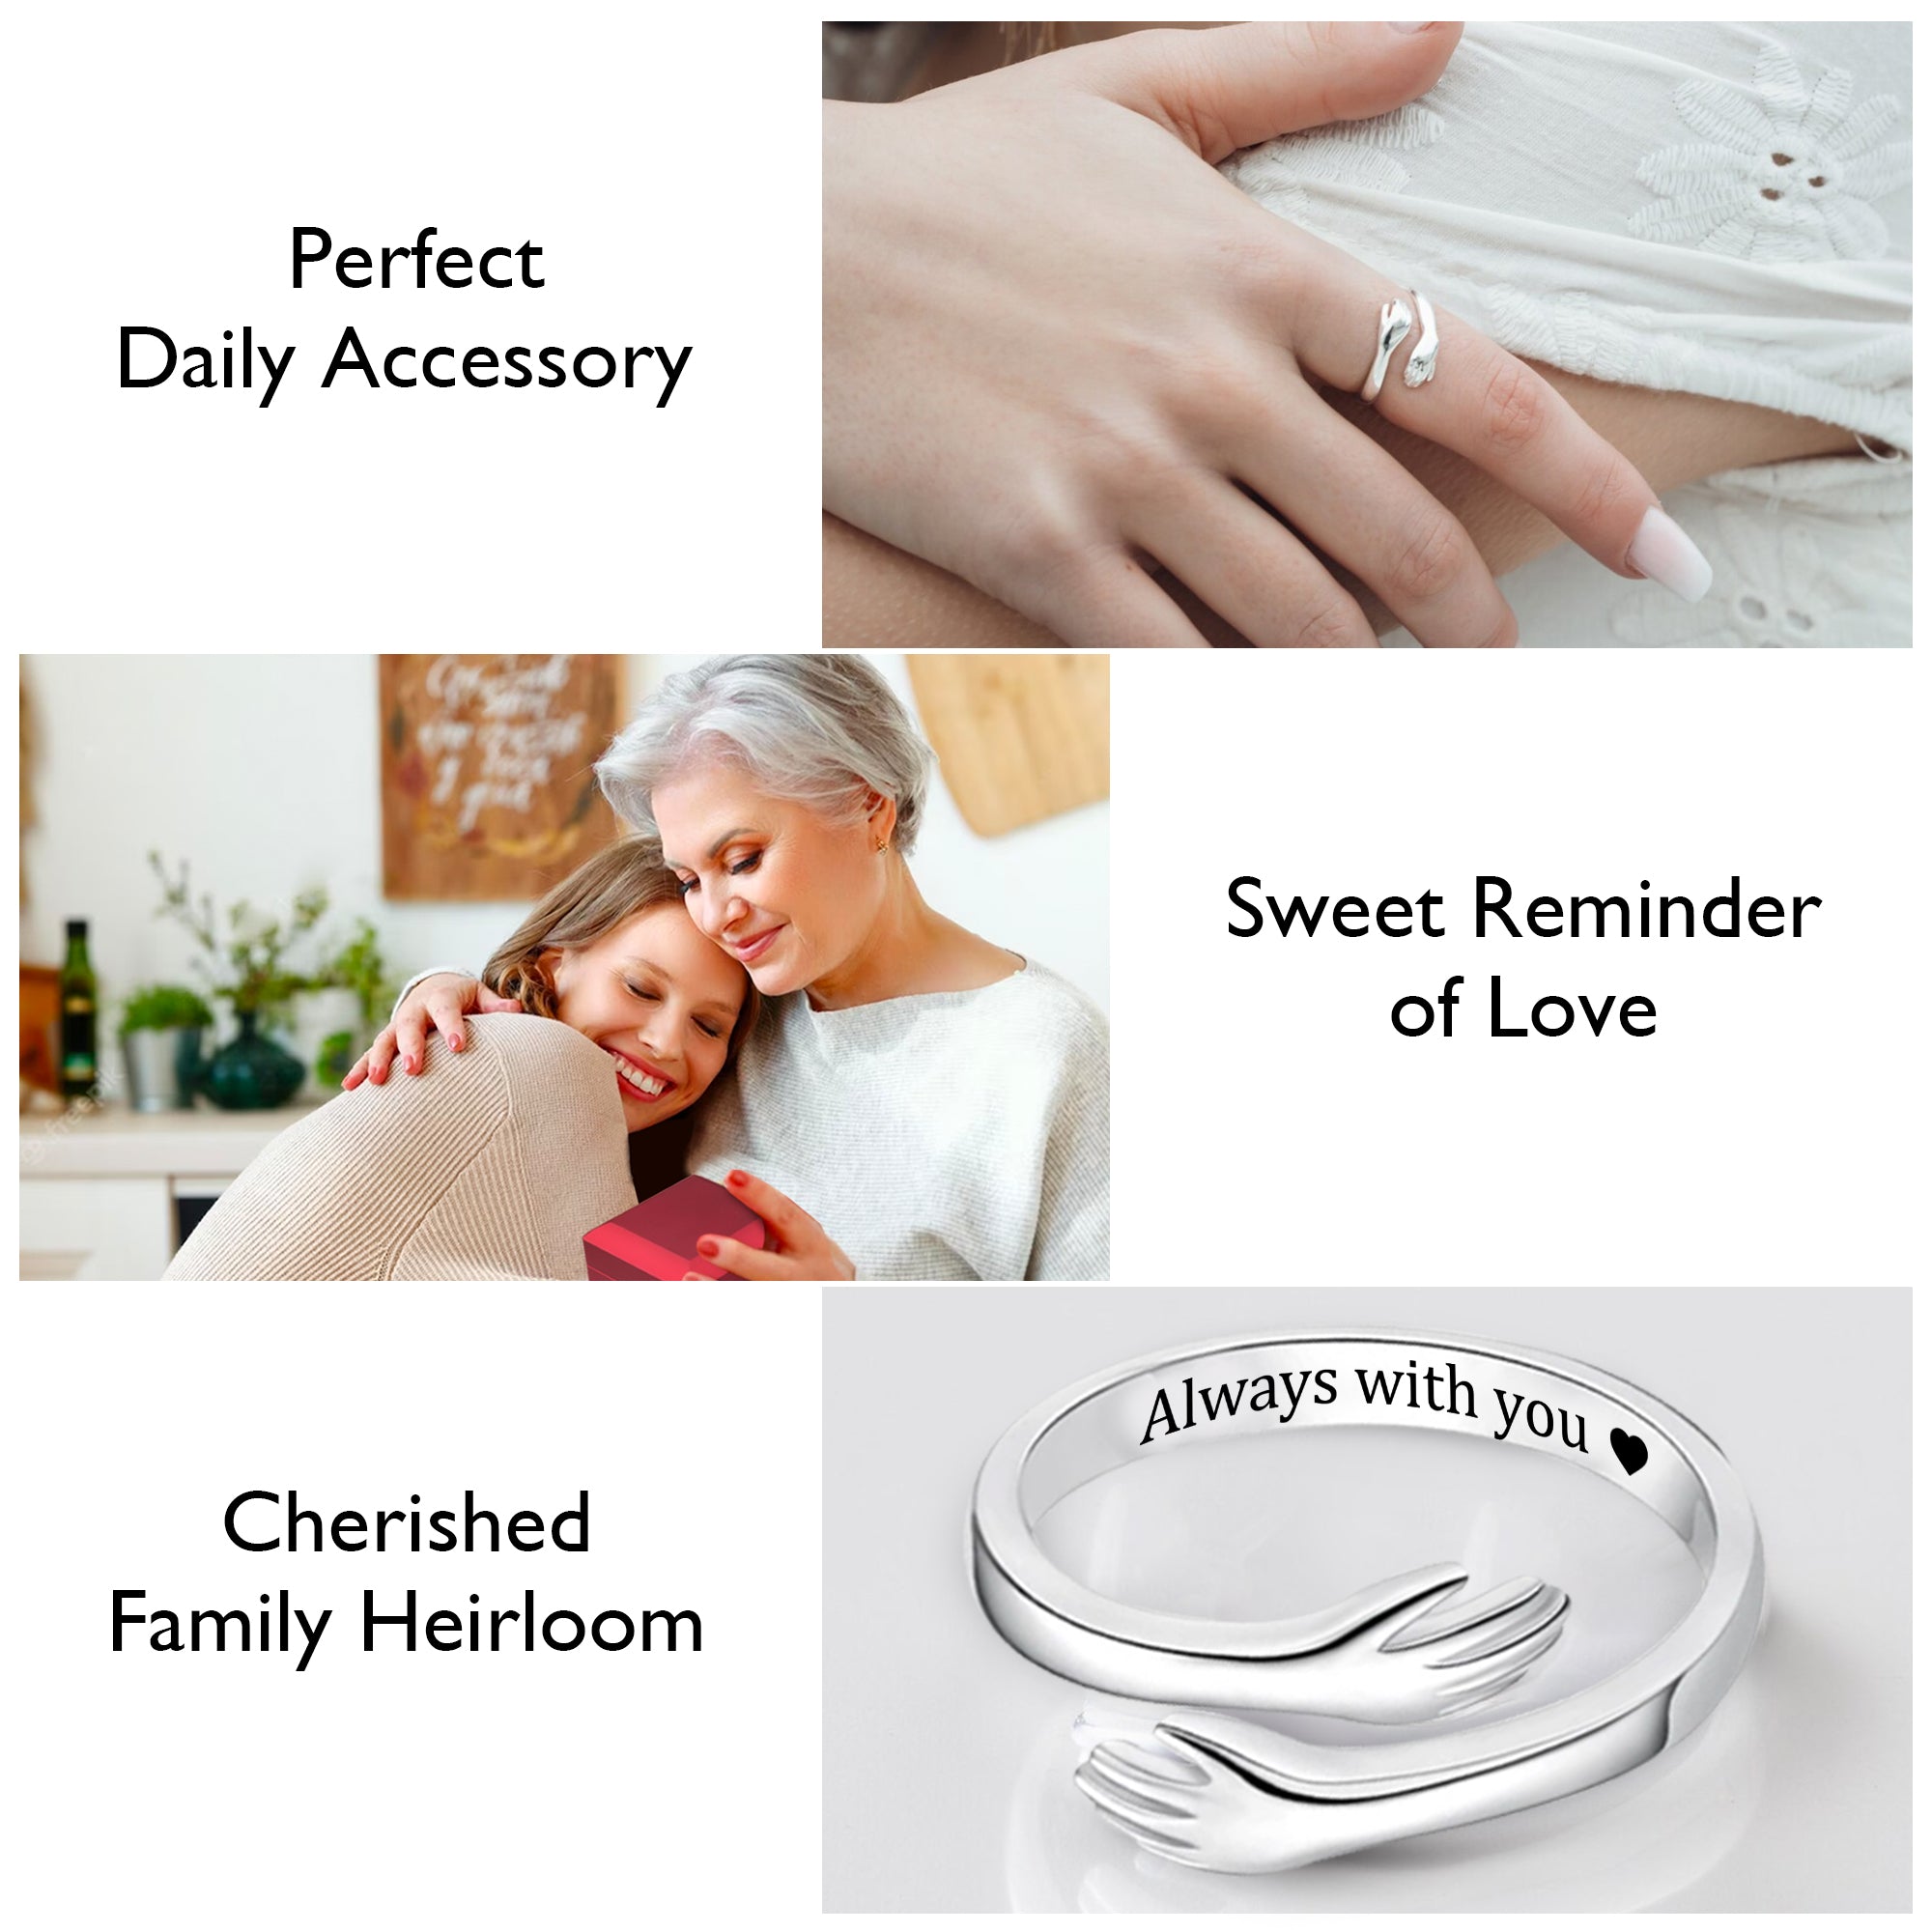 Personalized Granddaughter Hug Ring for Joyful Holiday Connections - Gyk23005